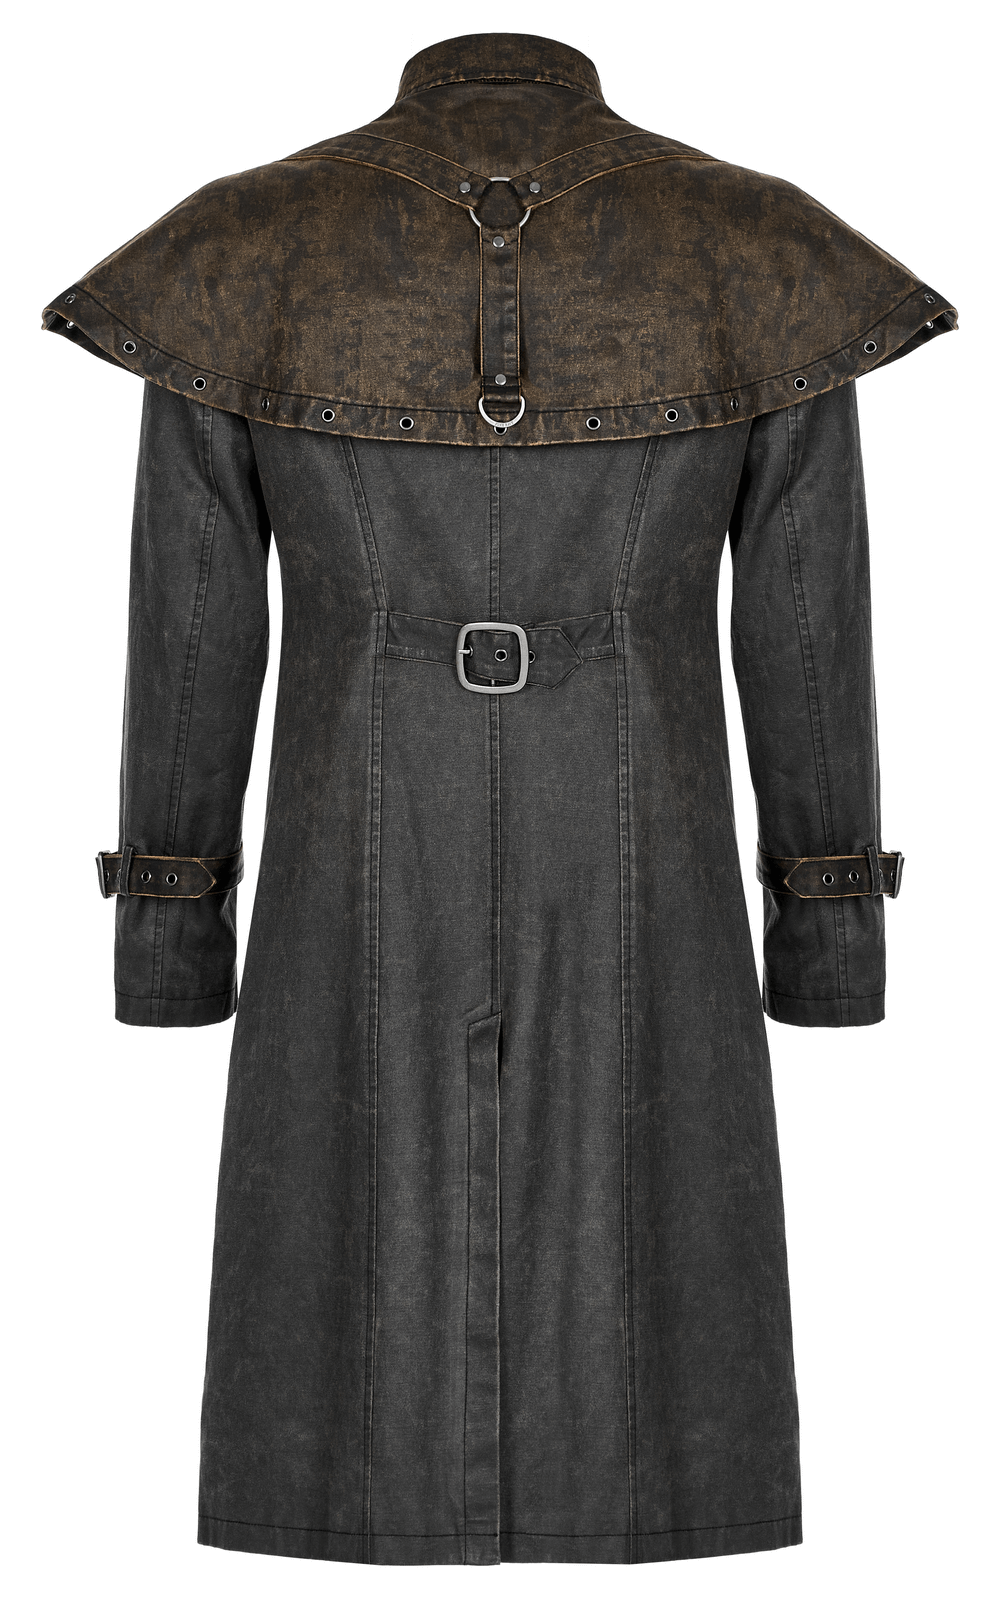 Distressed Steampunk Tailcoat with Buckle Accents - HARD'N'HEAVY